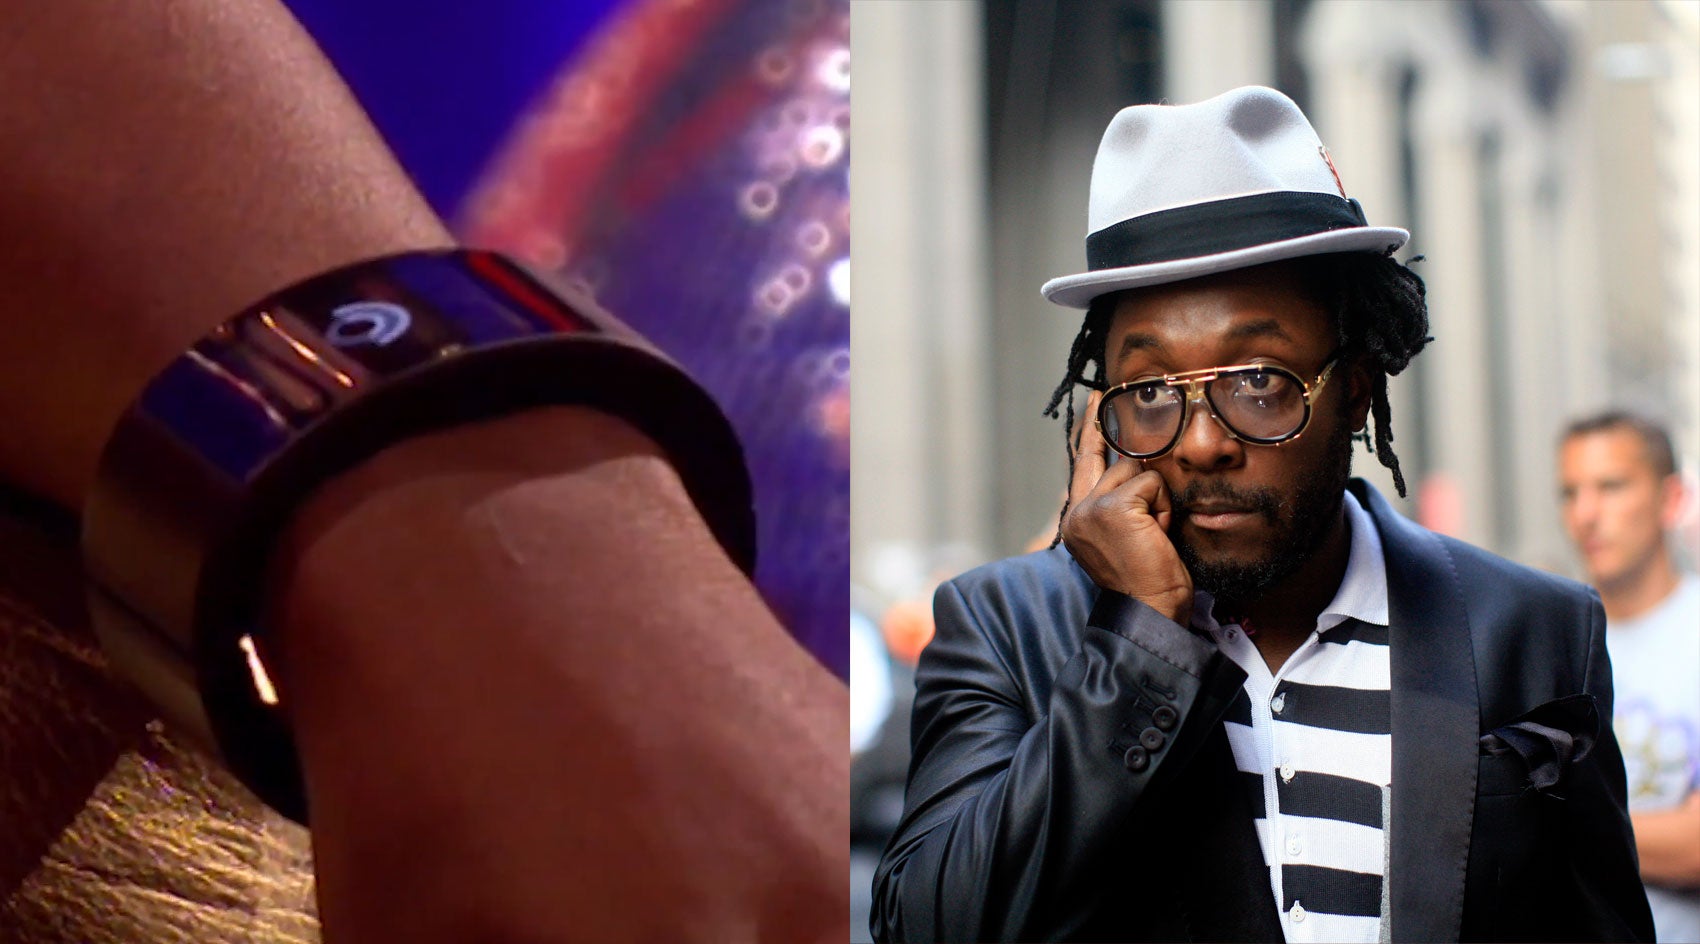 Will.i.am's smartwatch (left) and Will.i.am using a boring old hand mounted boring-phone (right).